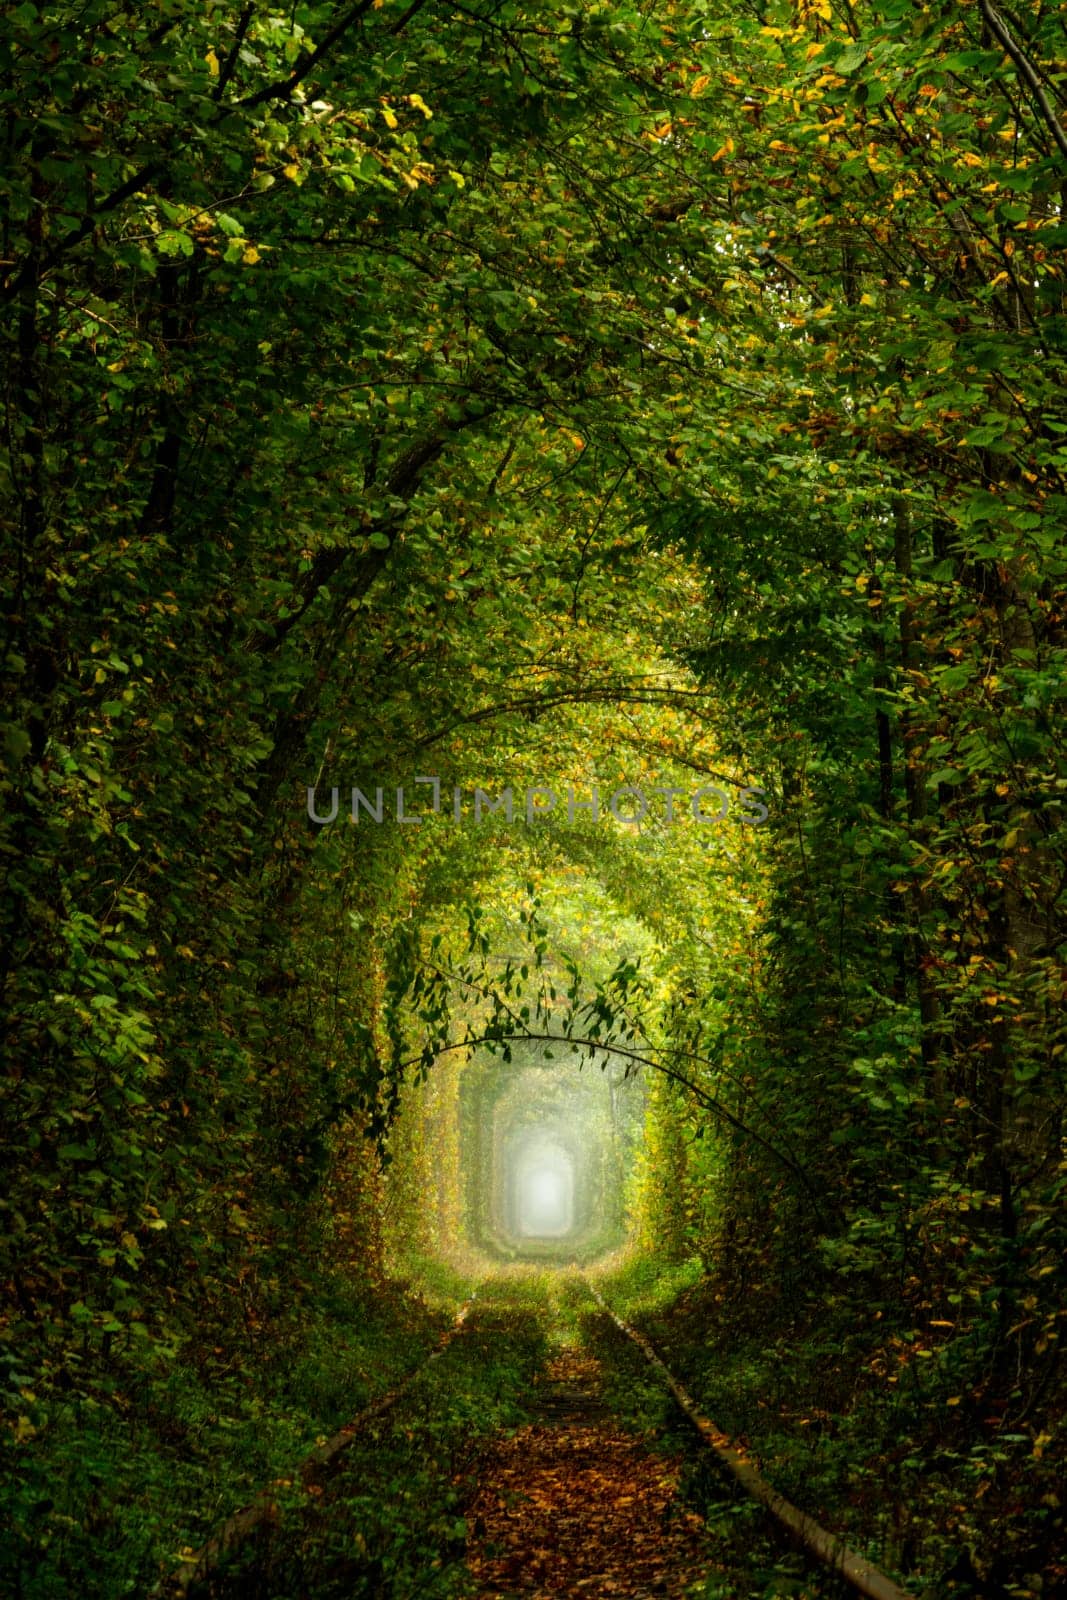 Ukrainian Tunnel of Love and Romantic Green Branch by Ruckzack